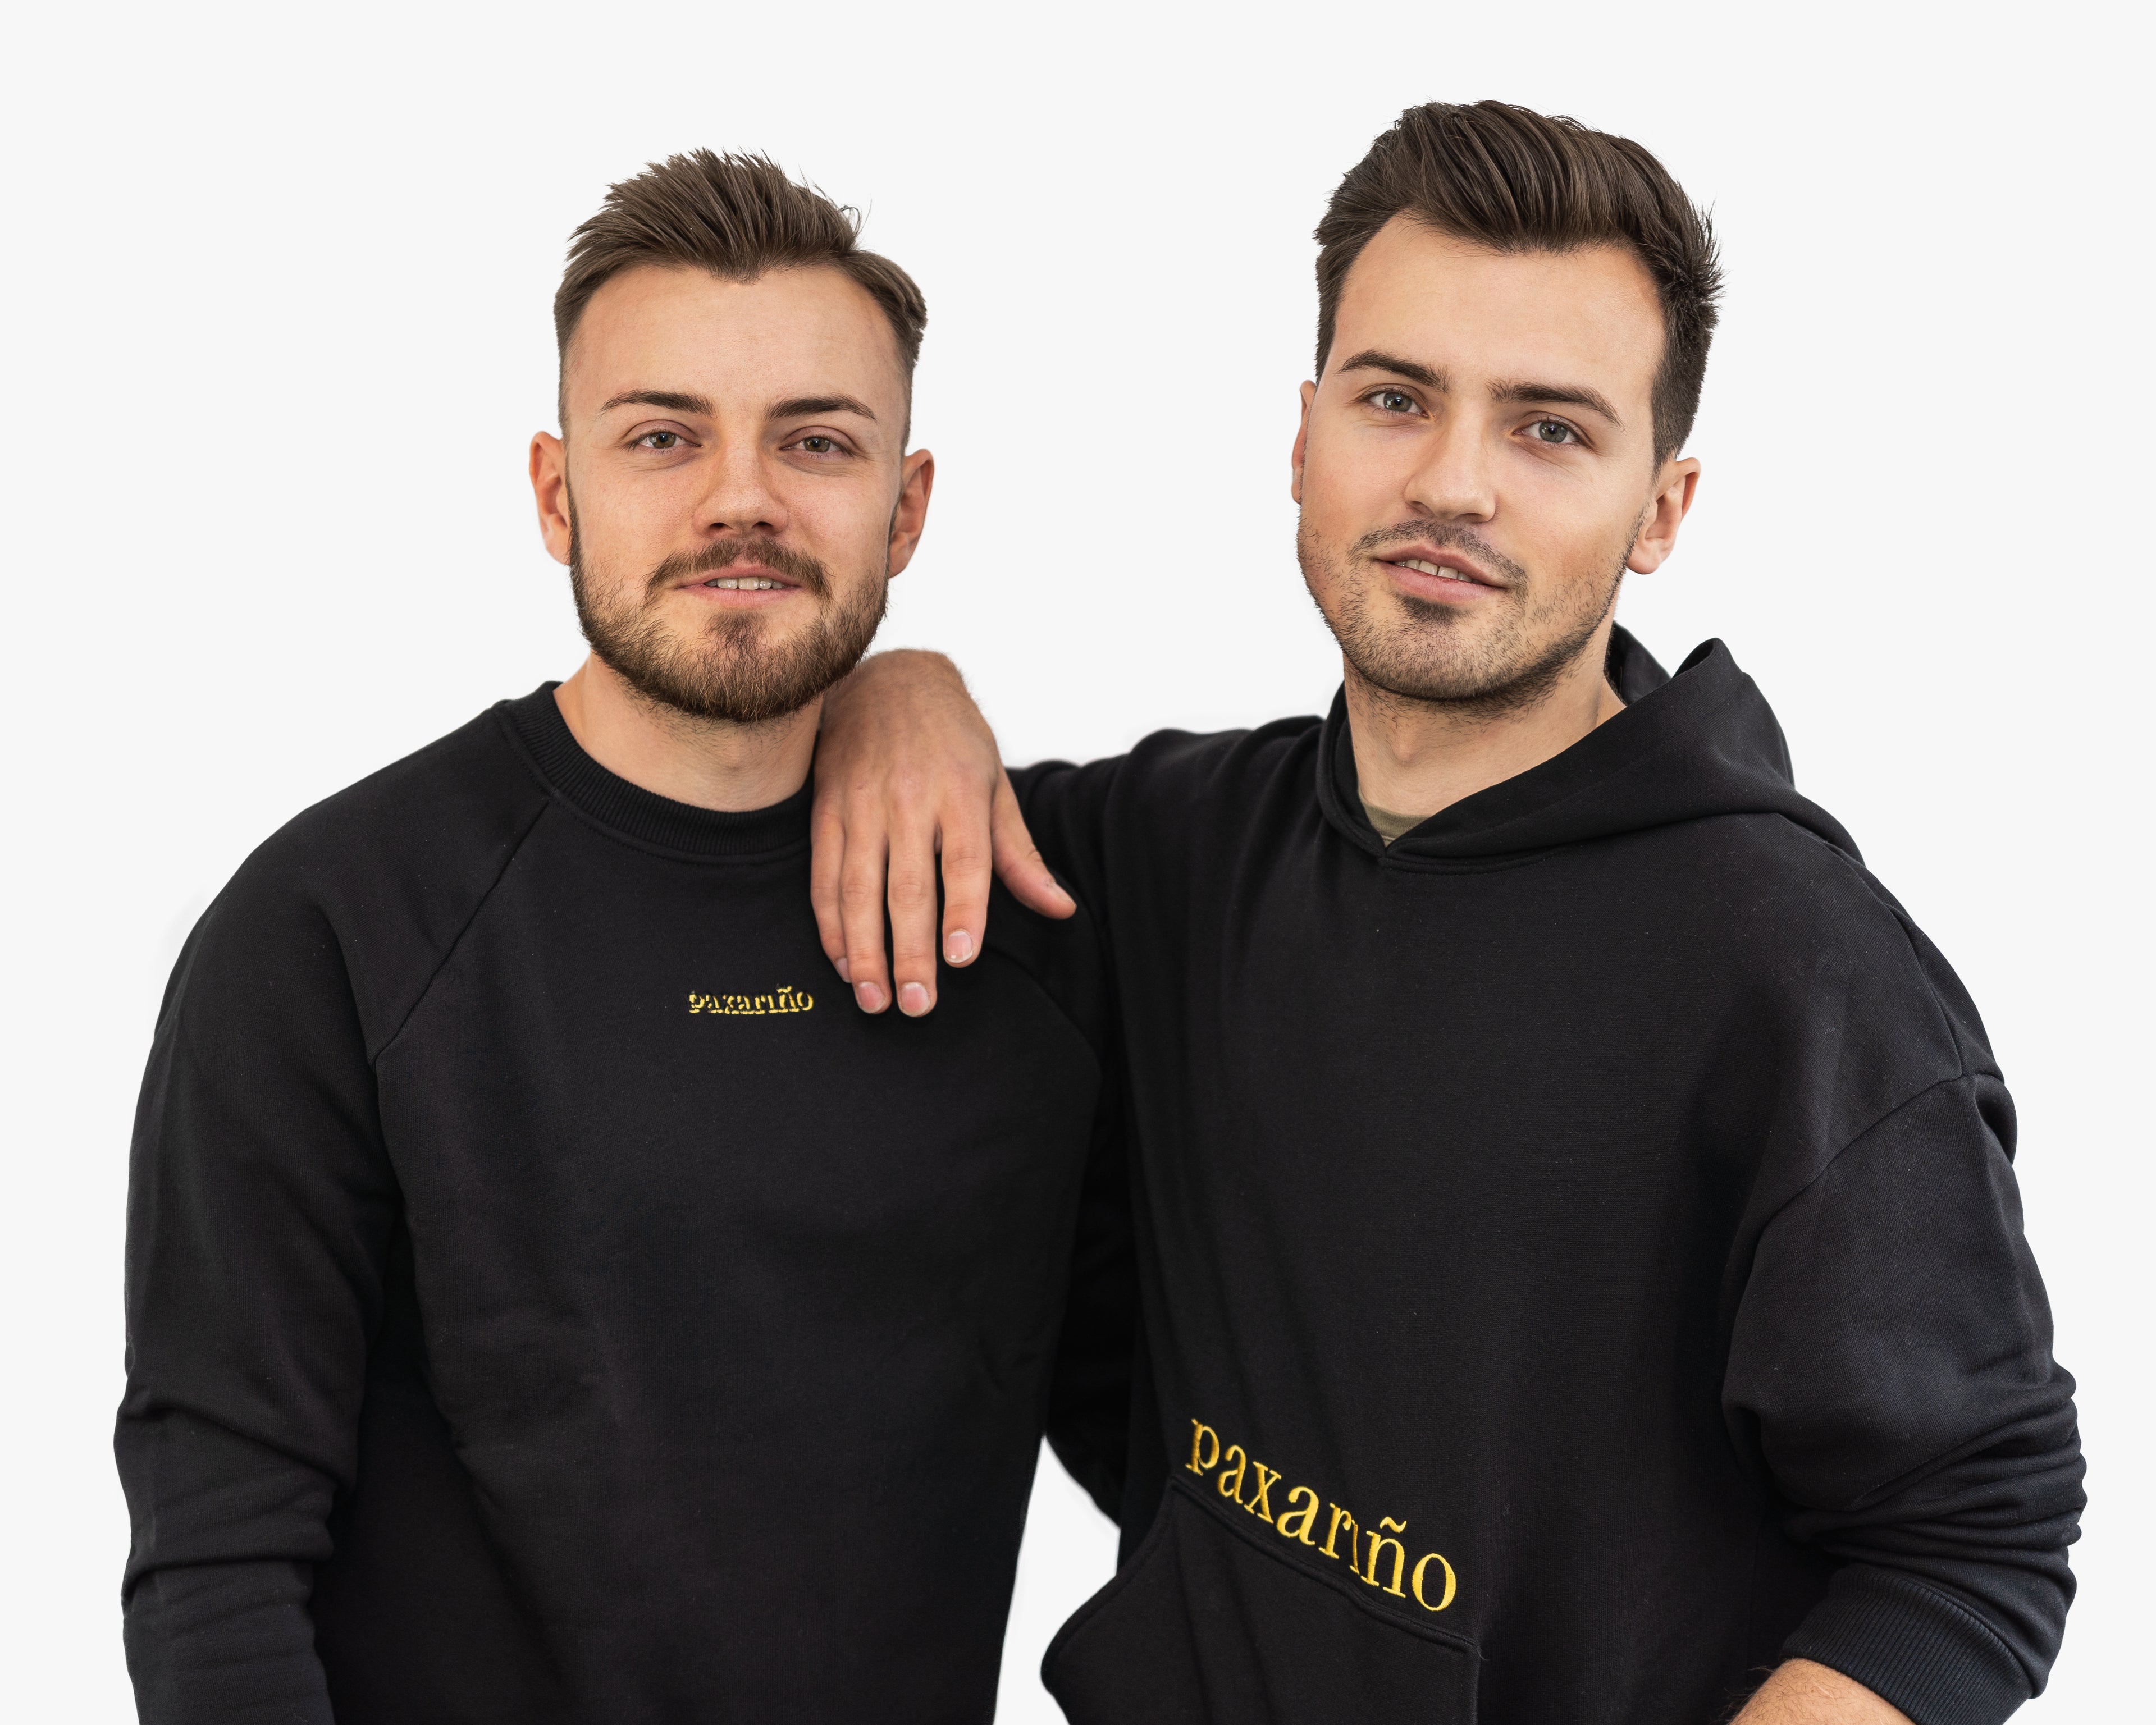 A picture of the two founders of paxariño. On the left is Sebastian and on the right is Cedric.